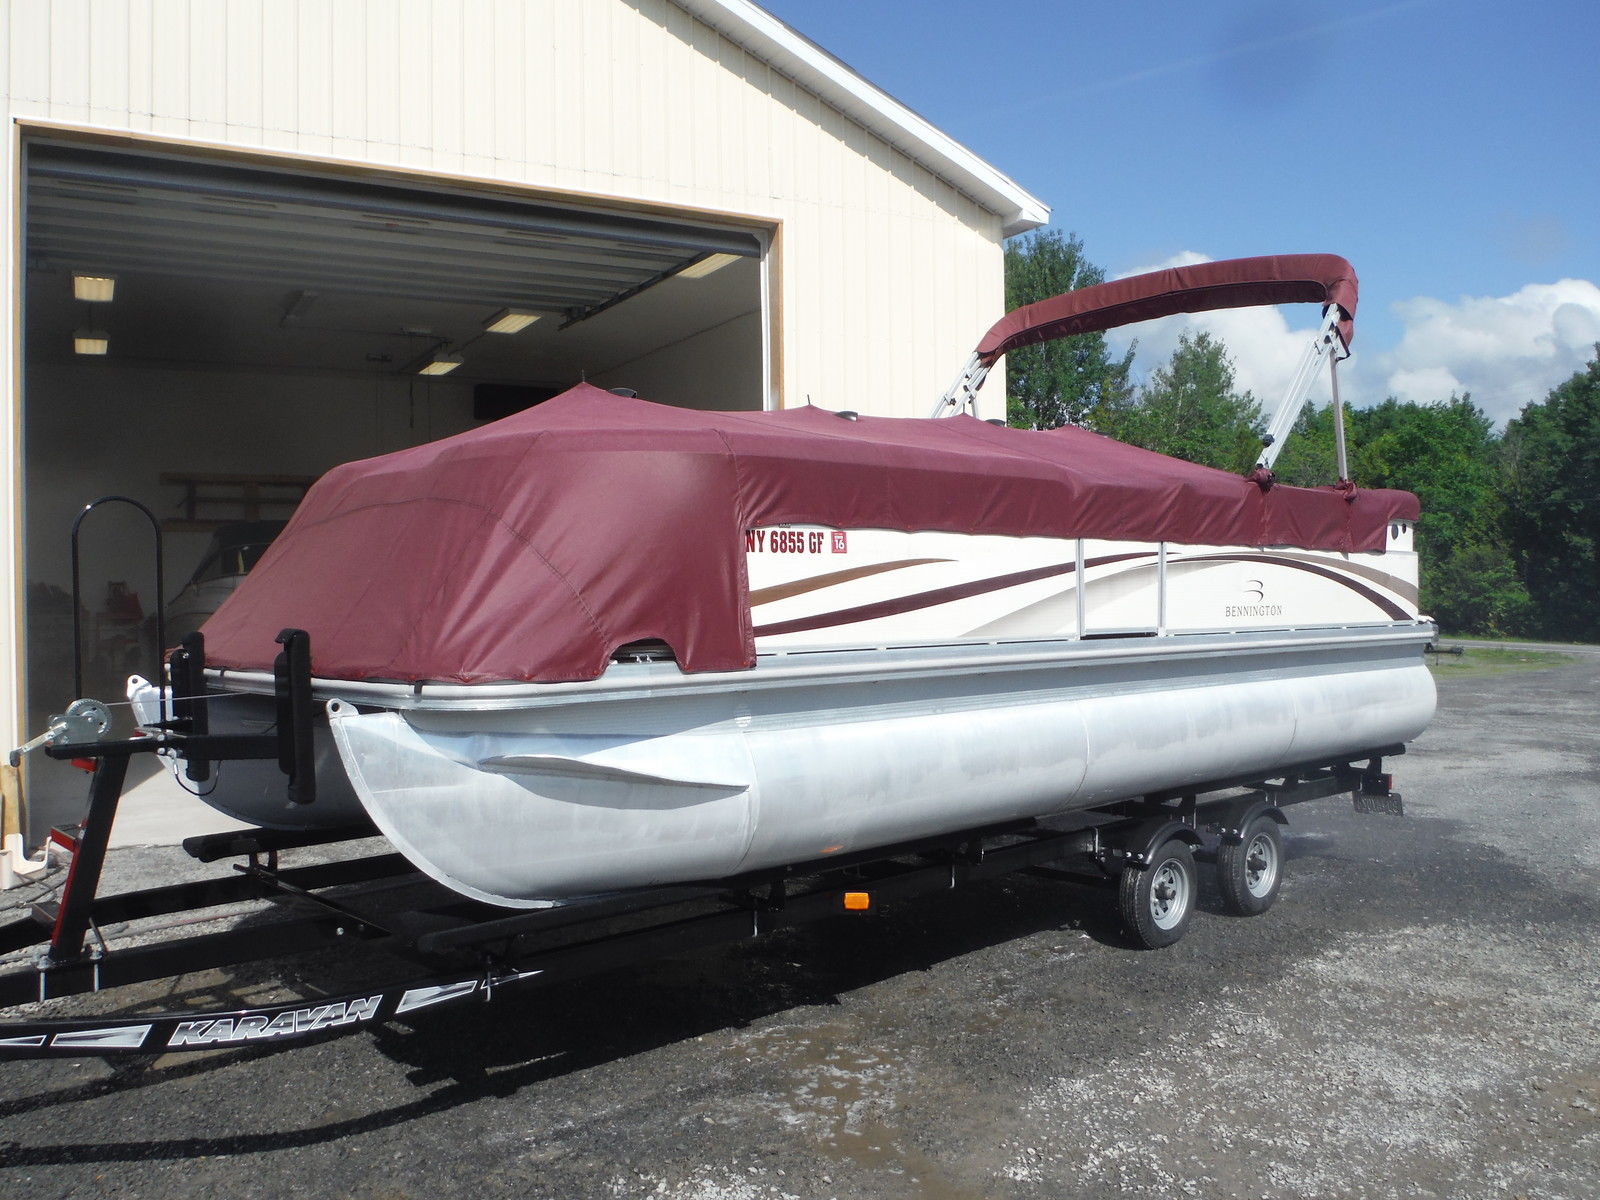 bennington pontoon 2004 for sale for $16,000 - boats-from